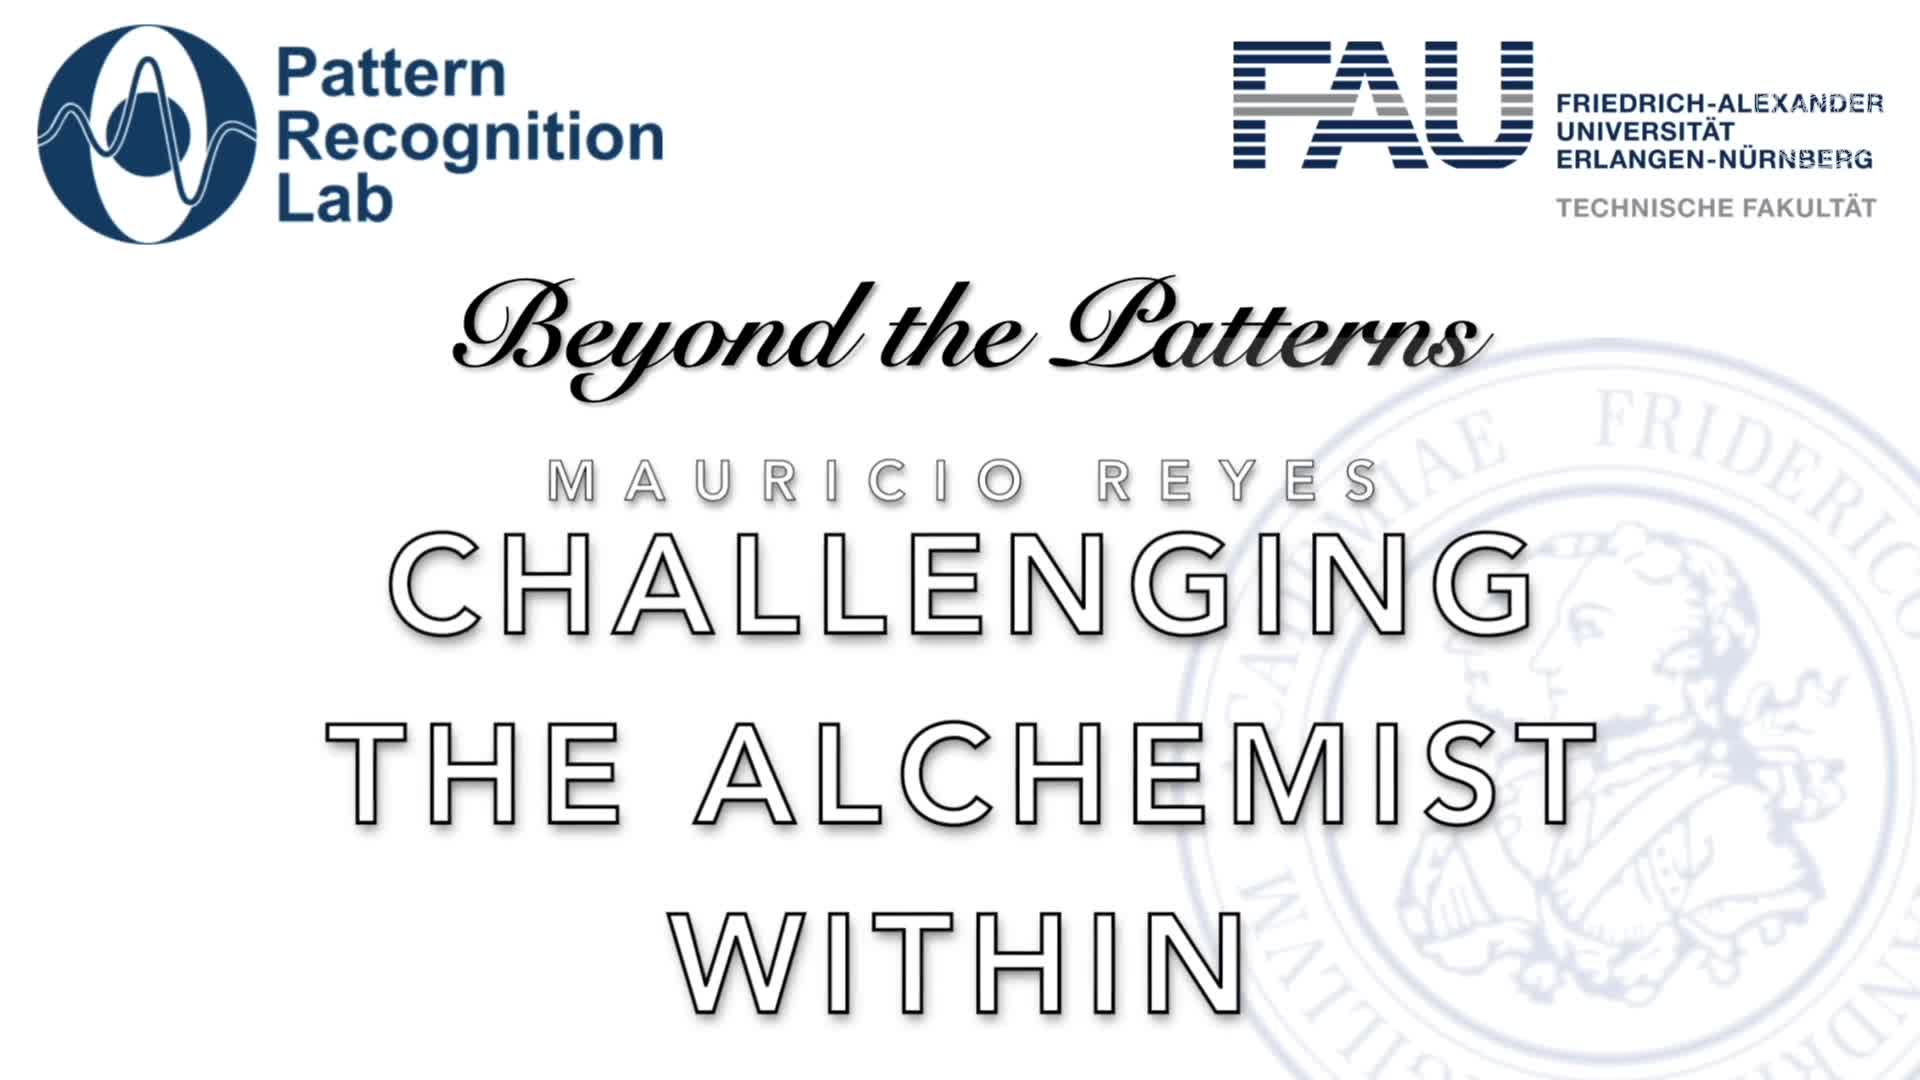 Beyond the Patterns - Mauricio Reyes - Medical image analysis in the era of deep learning: From performance to challenging the alchemist within preview image